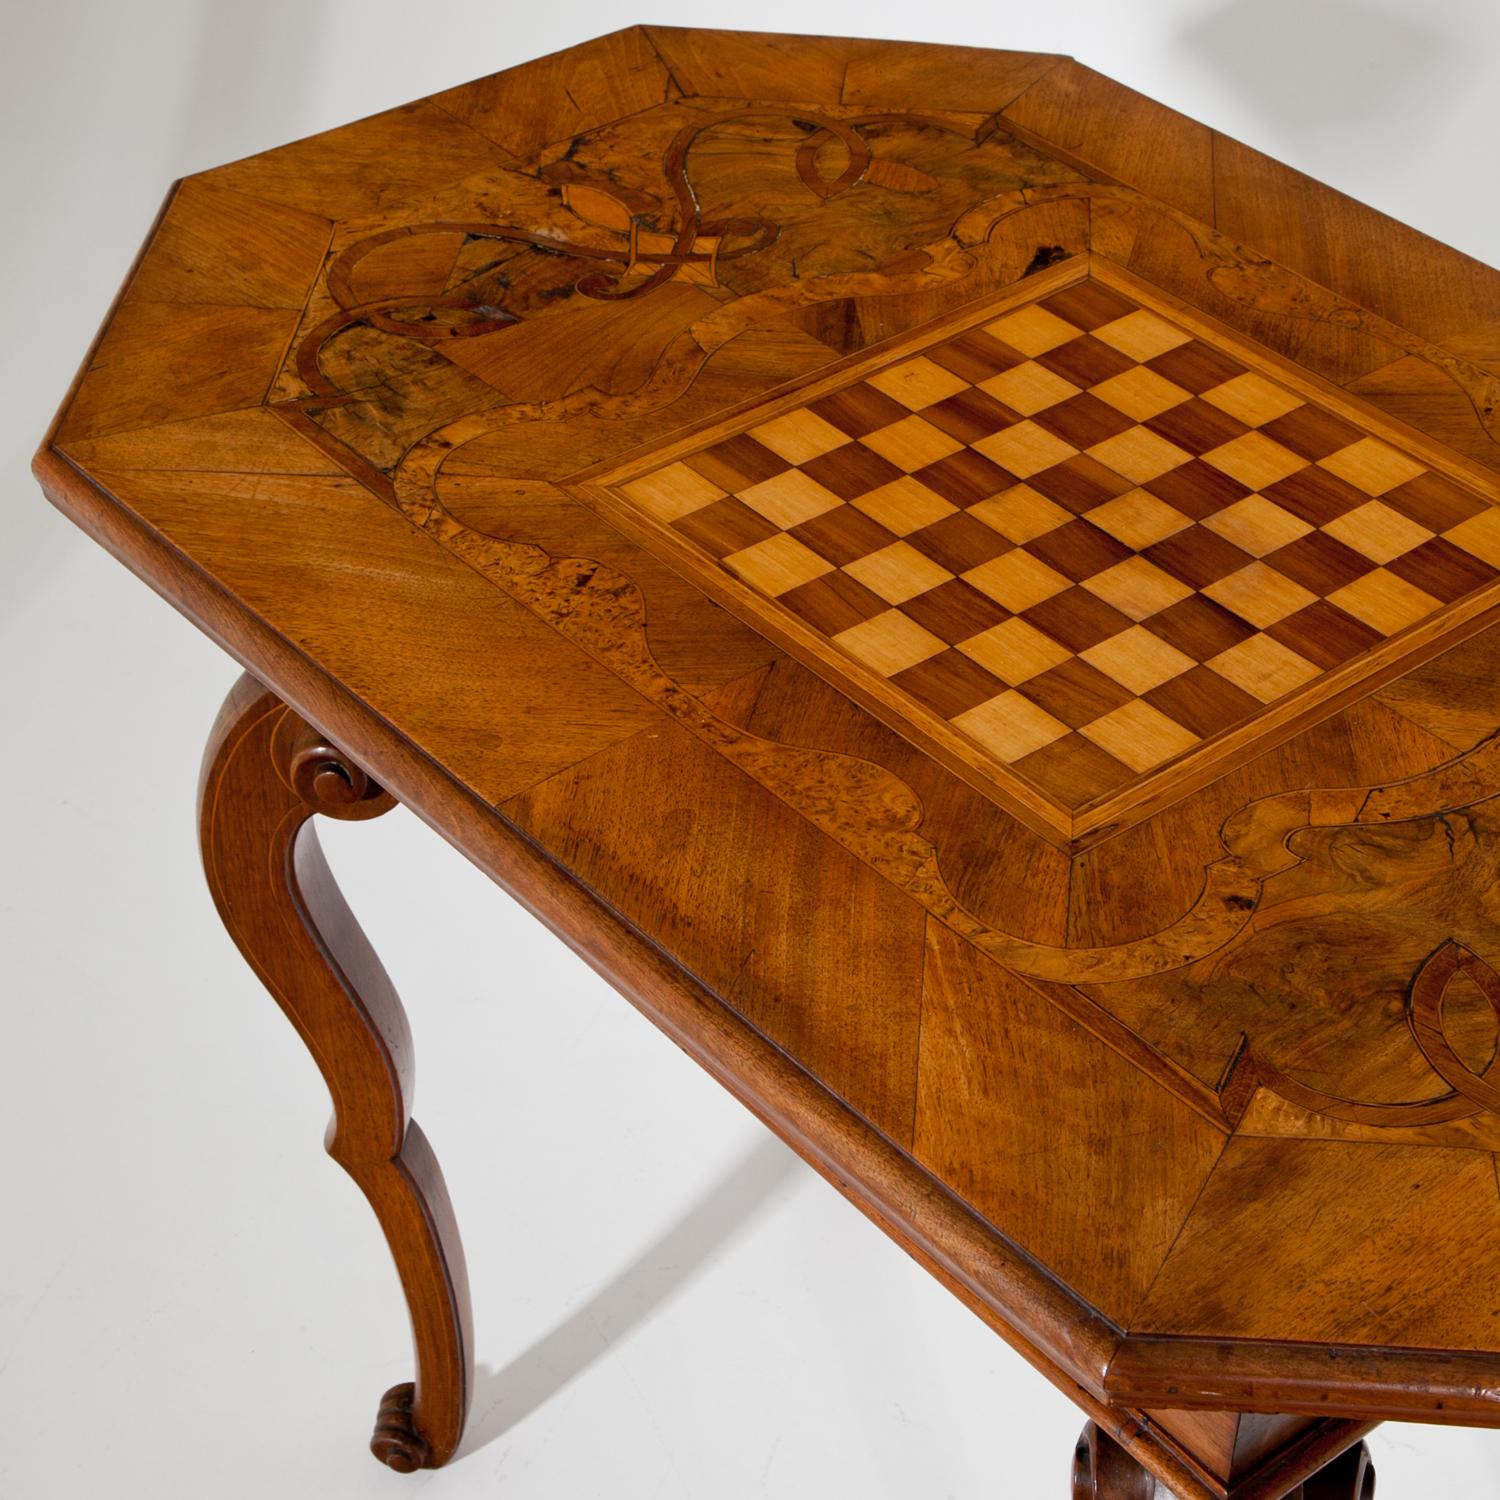 European Baroque Table, Late 18th-Early 19th Century